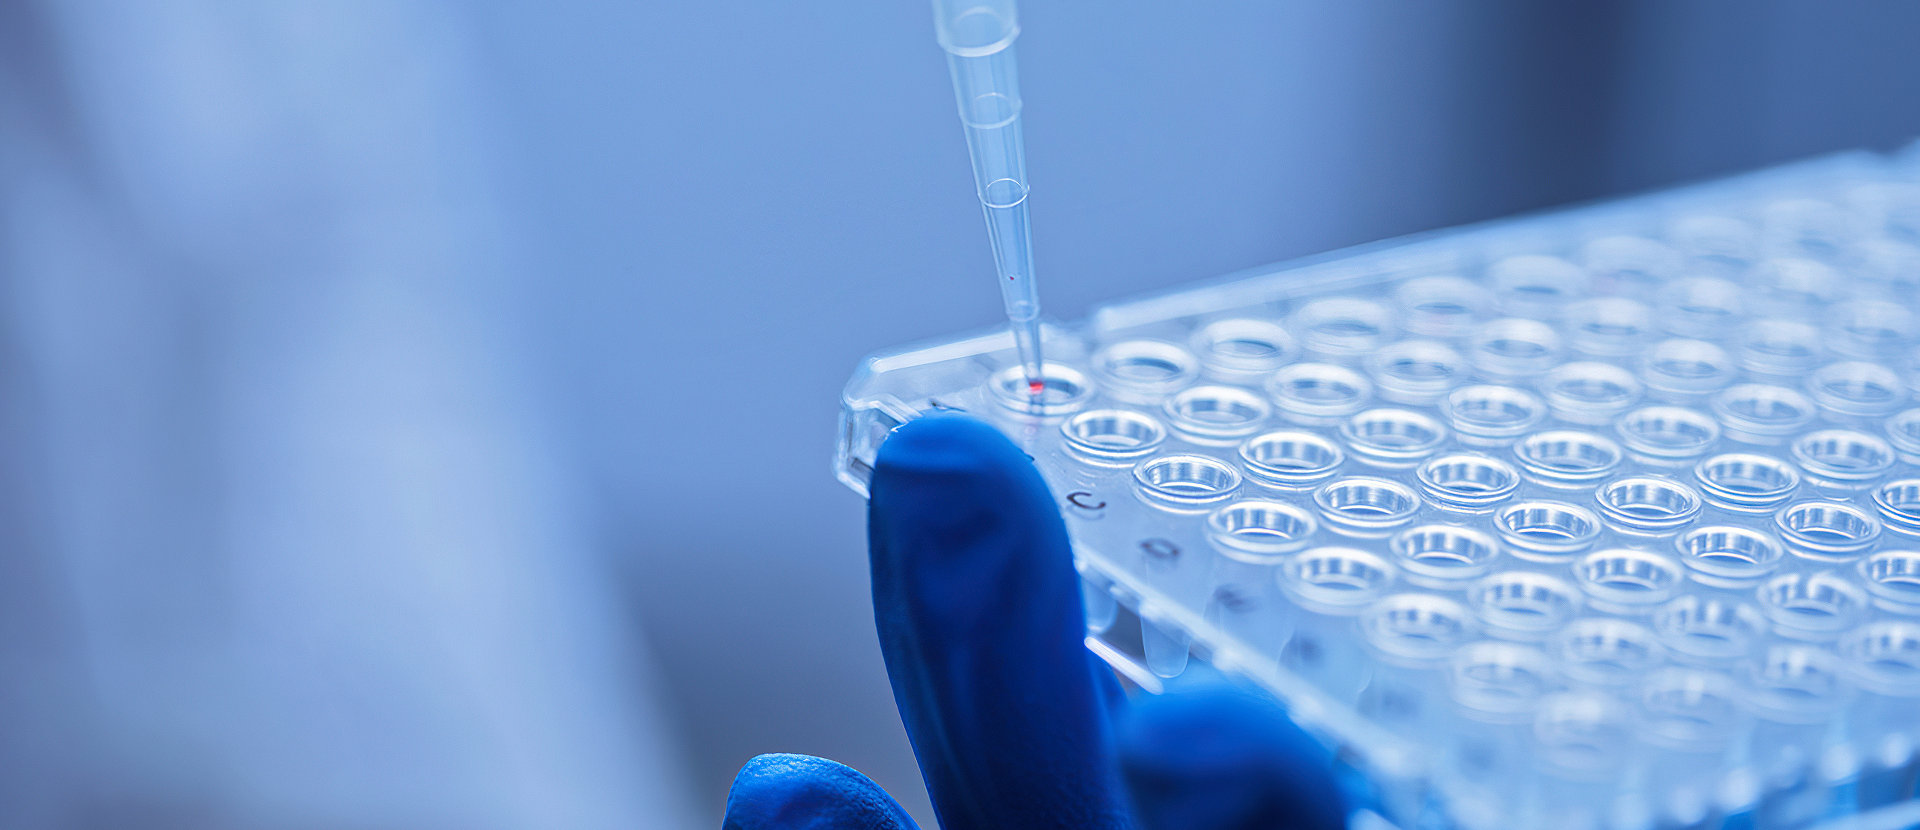 CGT cell gene therapy product quality testing services